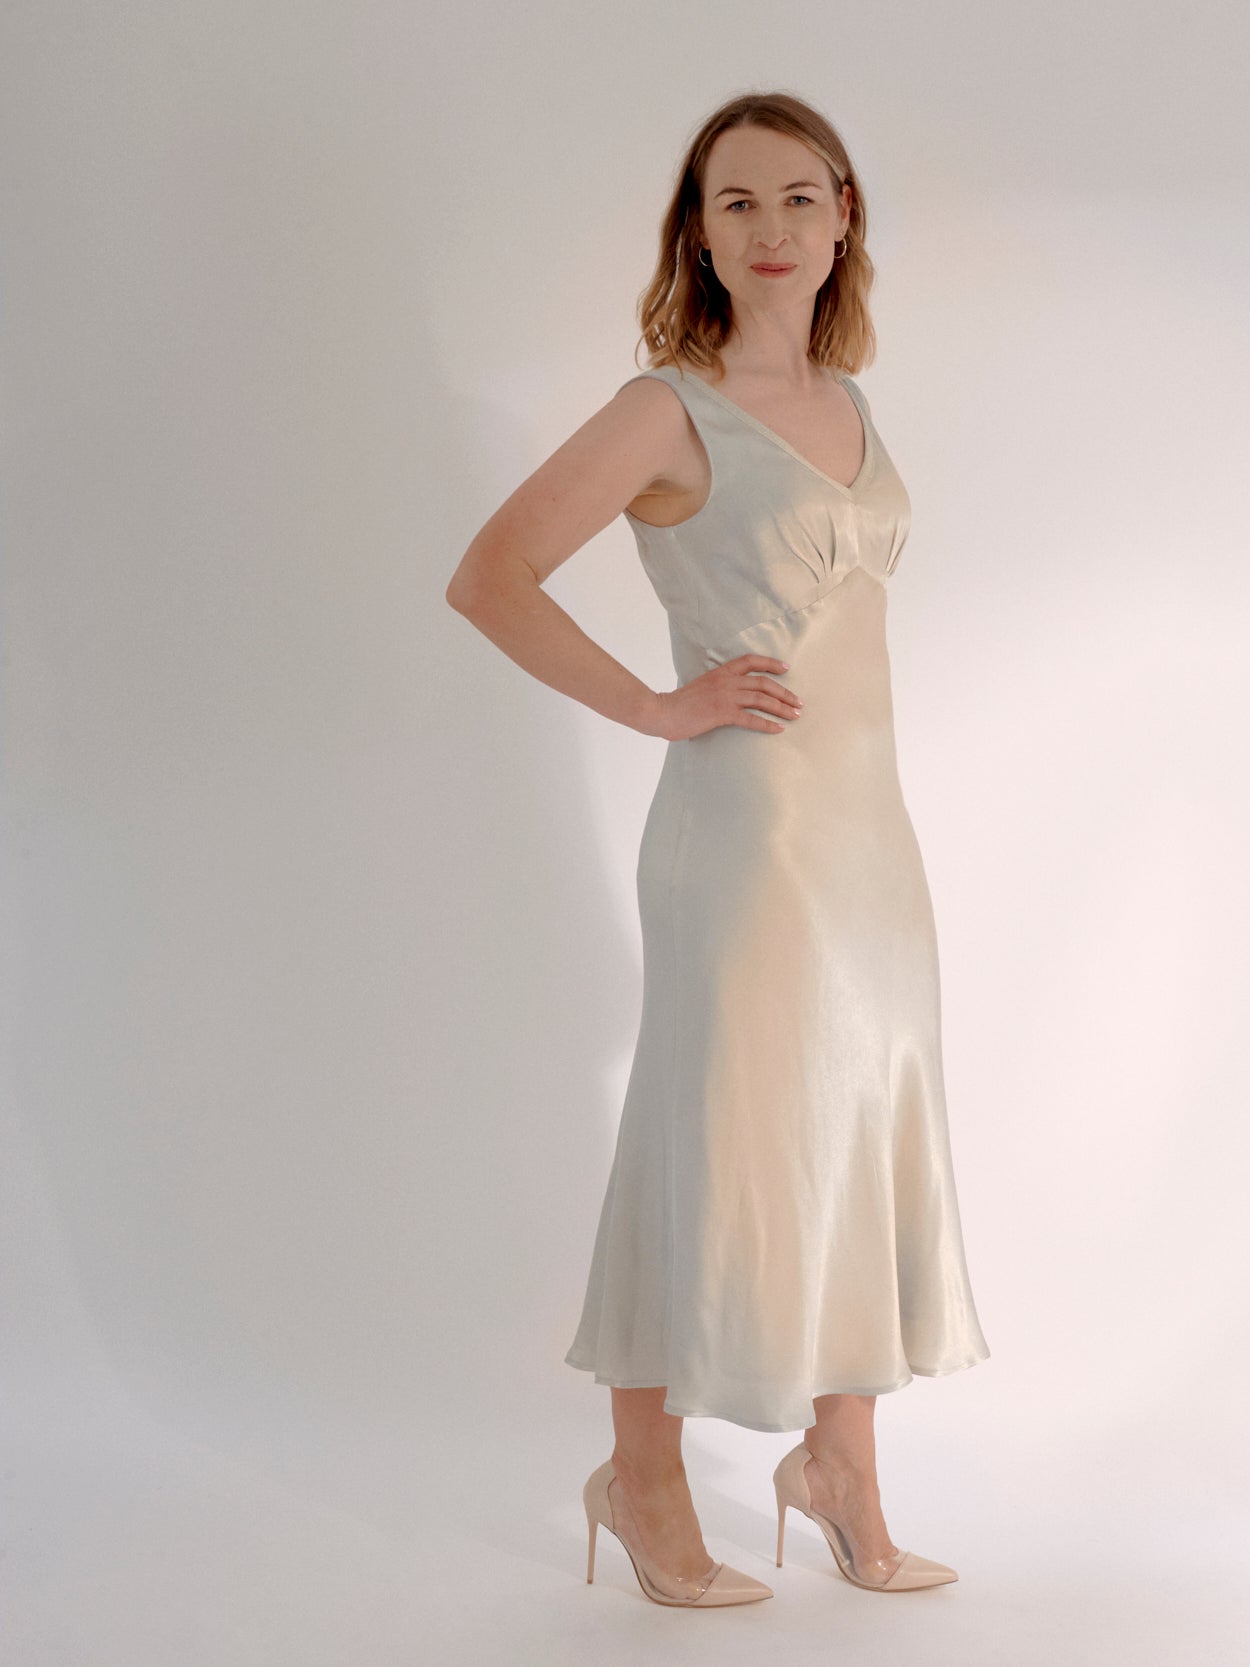 Occasion maternity dress. Make a fashion statement in this stunning silver satin dress. The perfect elevated maternity occasion wear dress for weddings, parties and evening events. The maternity dress’s clever design accommodates a 9-month bump, but is also a very flattering post-pregnancy as it drapes over the body.